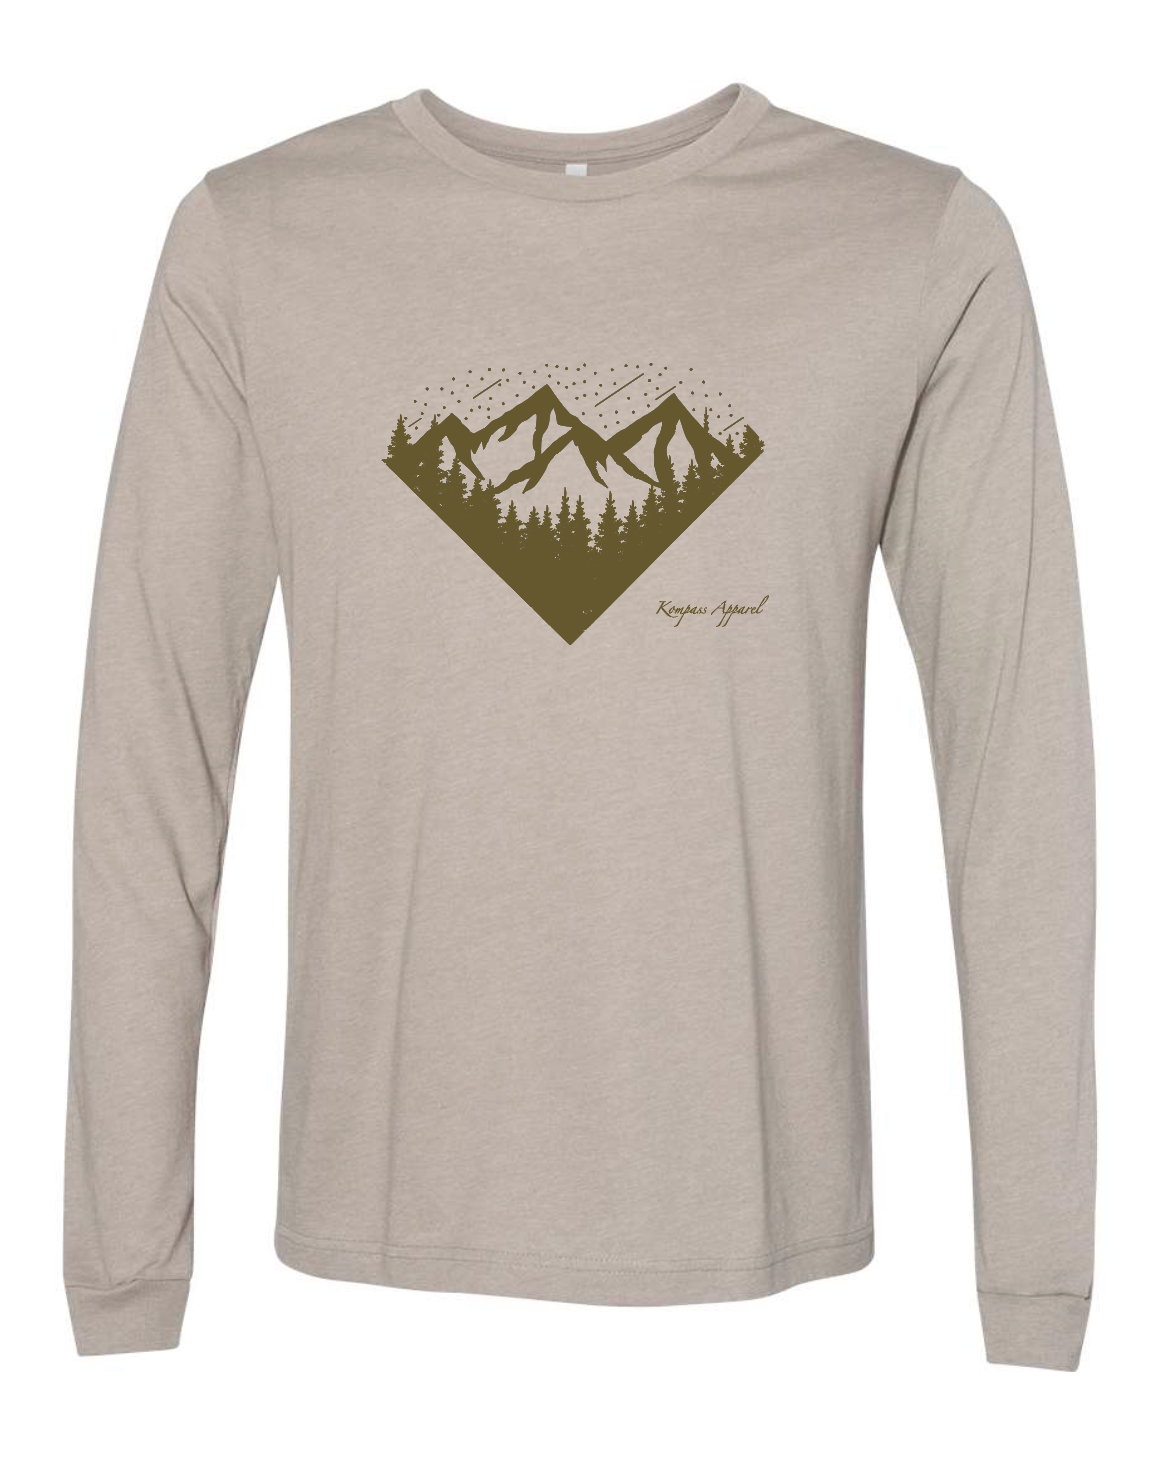 Mountain Themed T Shirt, Hiking Tees, Outdoor Shirts, Wilderness